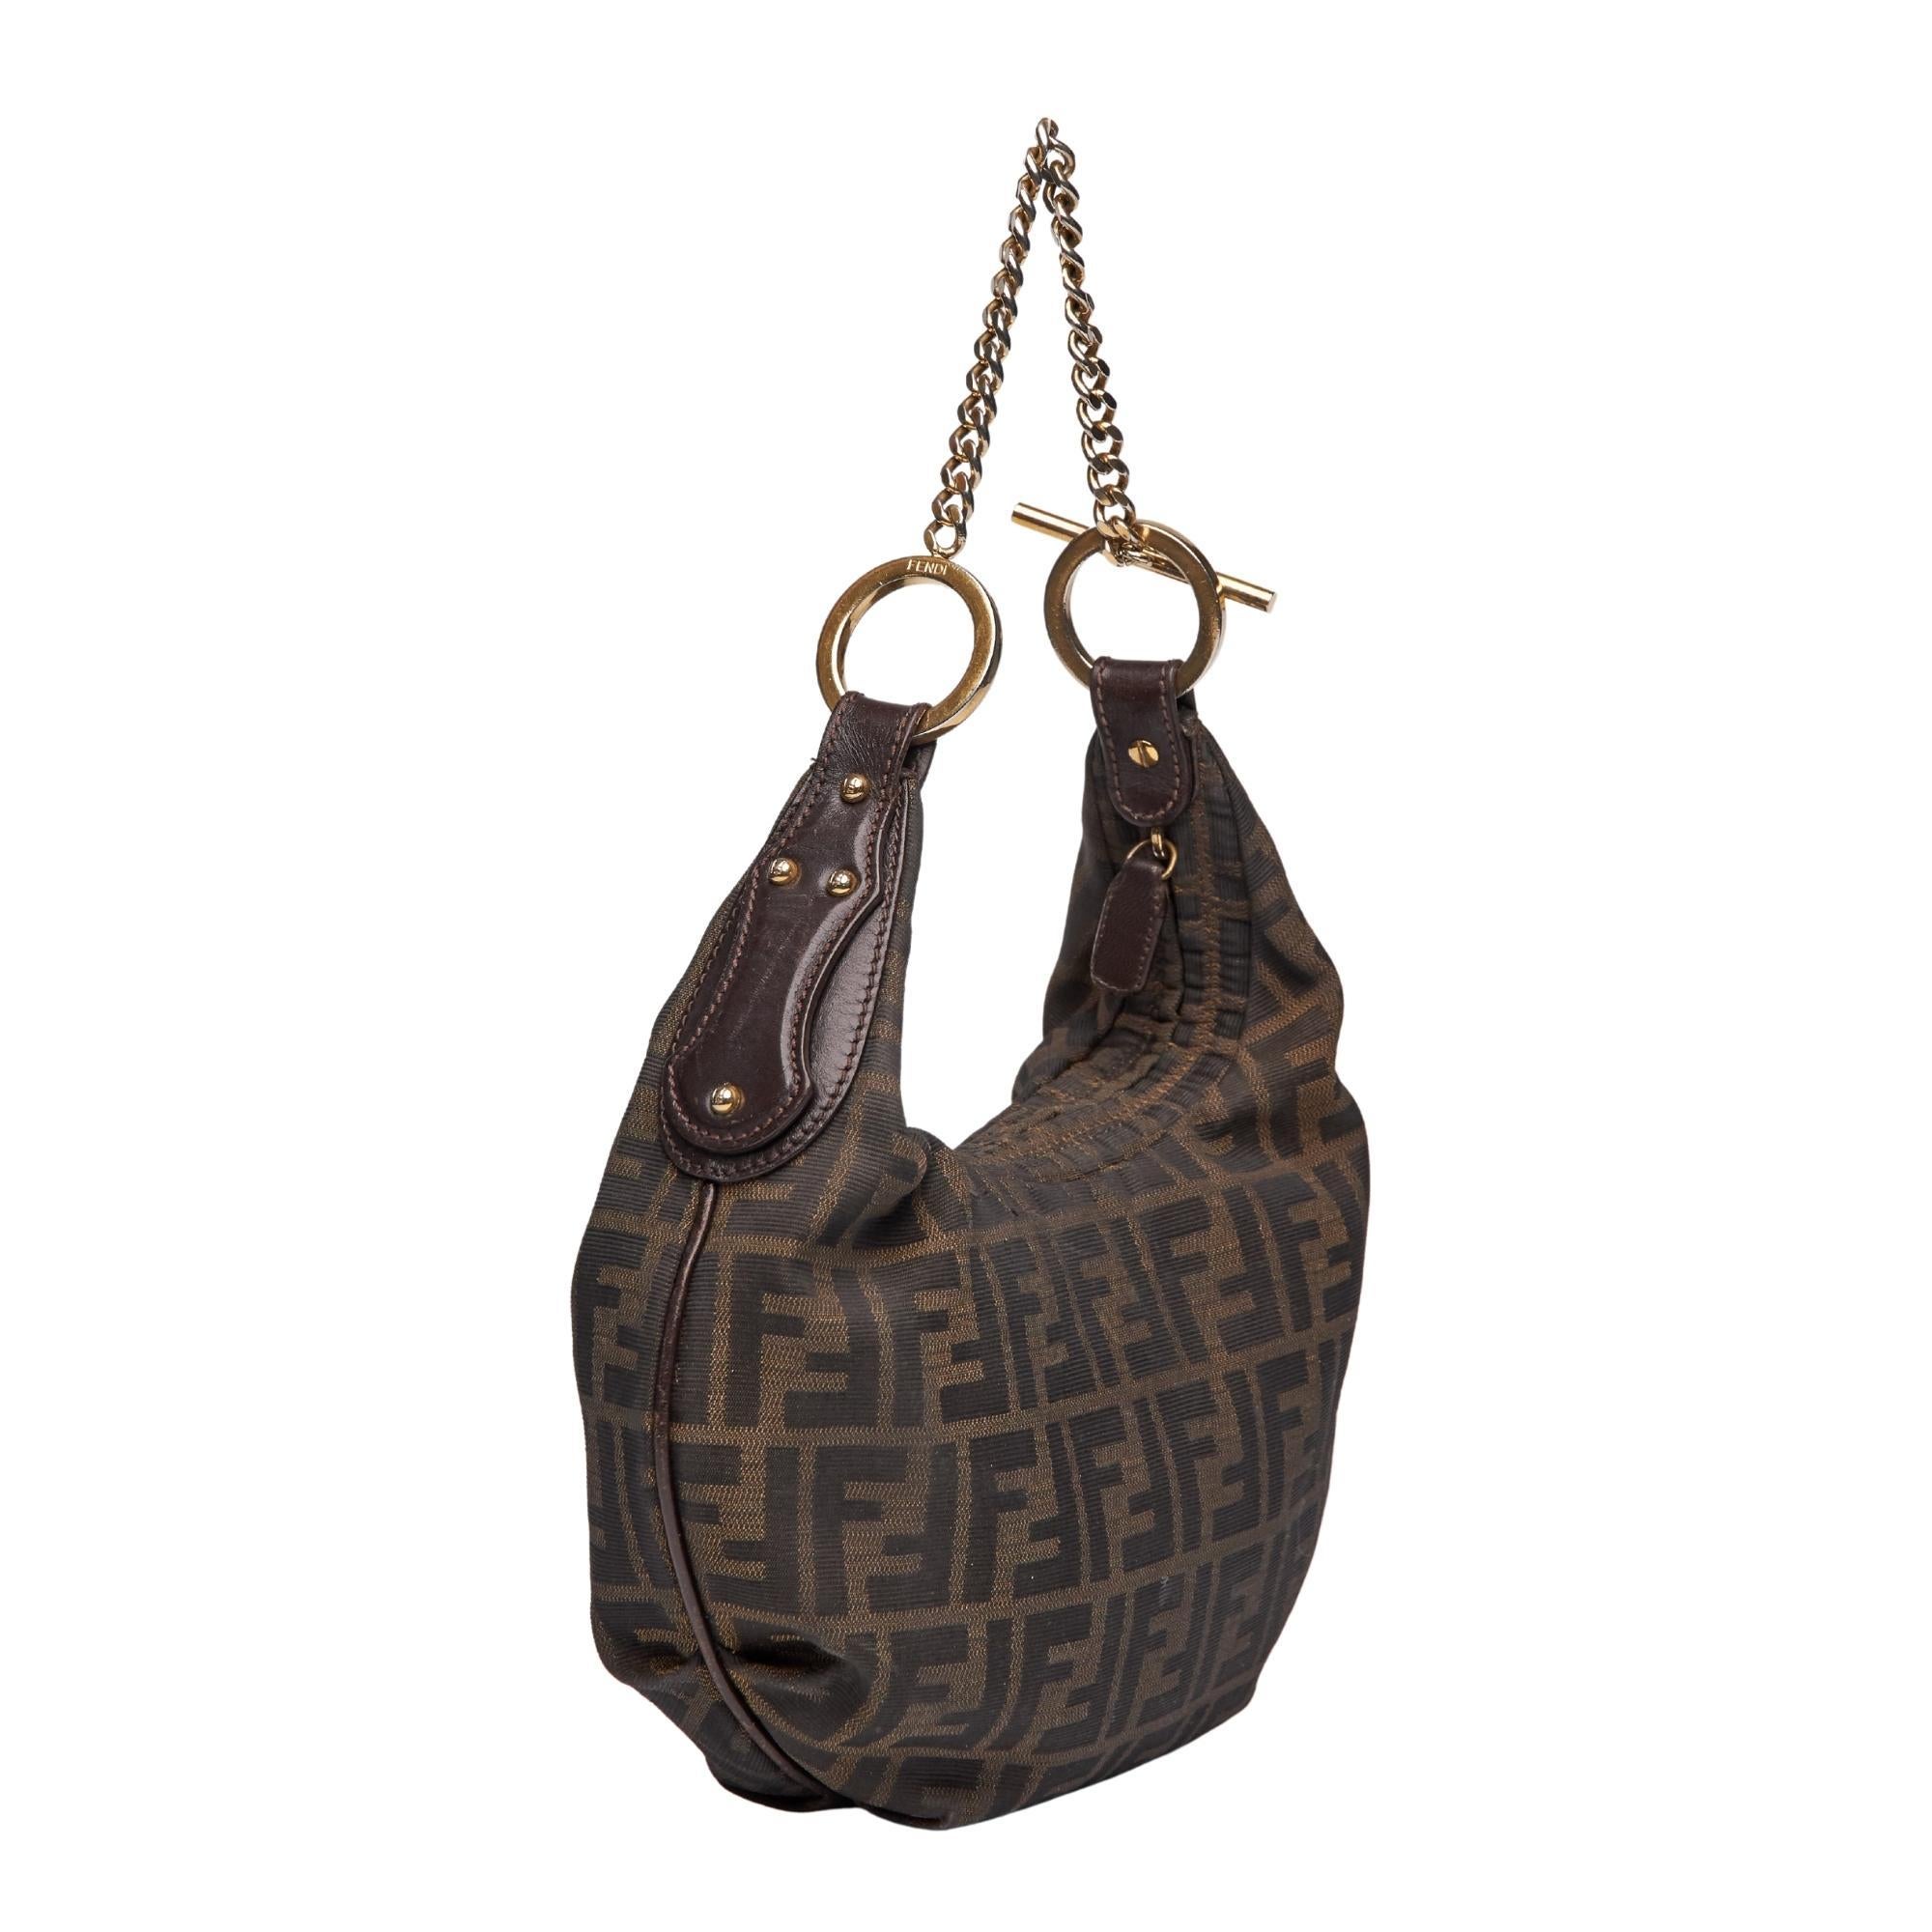 This Chef Chain Hobo bag by Fendi is a classic handbag with luxurious finishes. Made from zucca printed canvas with brown leather trim, this hobo is accented with a large gold Fendi engraved charm and gold chain link shoulder strap. The spacious